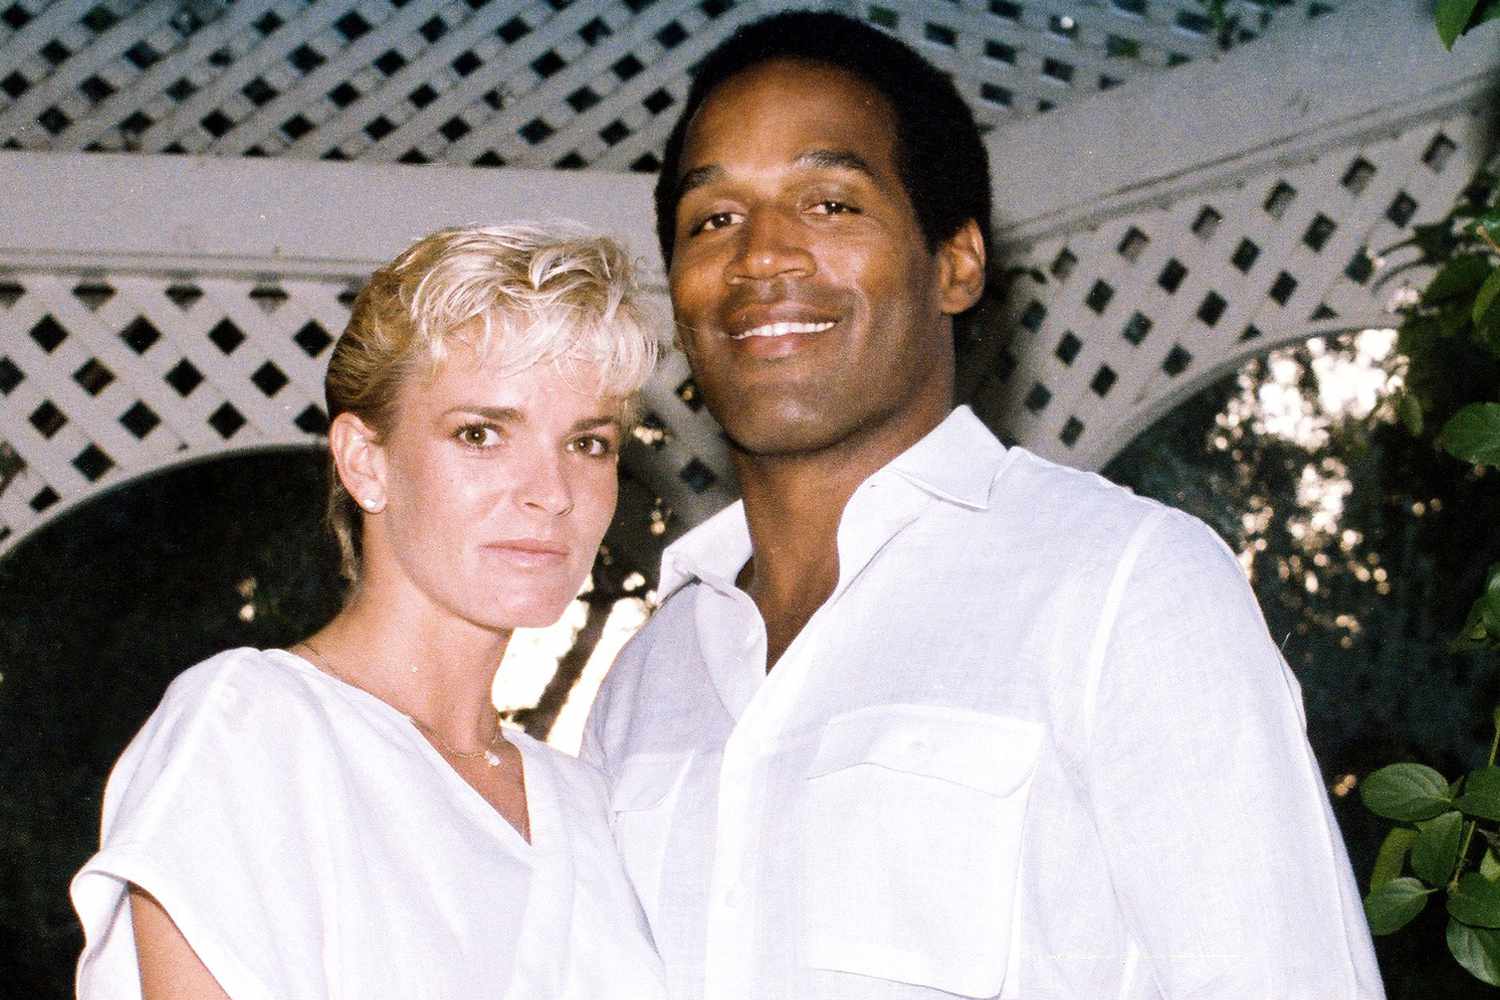 Nicole Brown Simpson and O.J.'s Interracial Relationship 'Was Never an Issue in Our Family' Says Her Sisters (Exclusive)